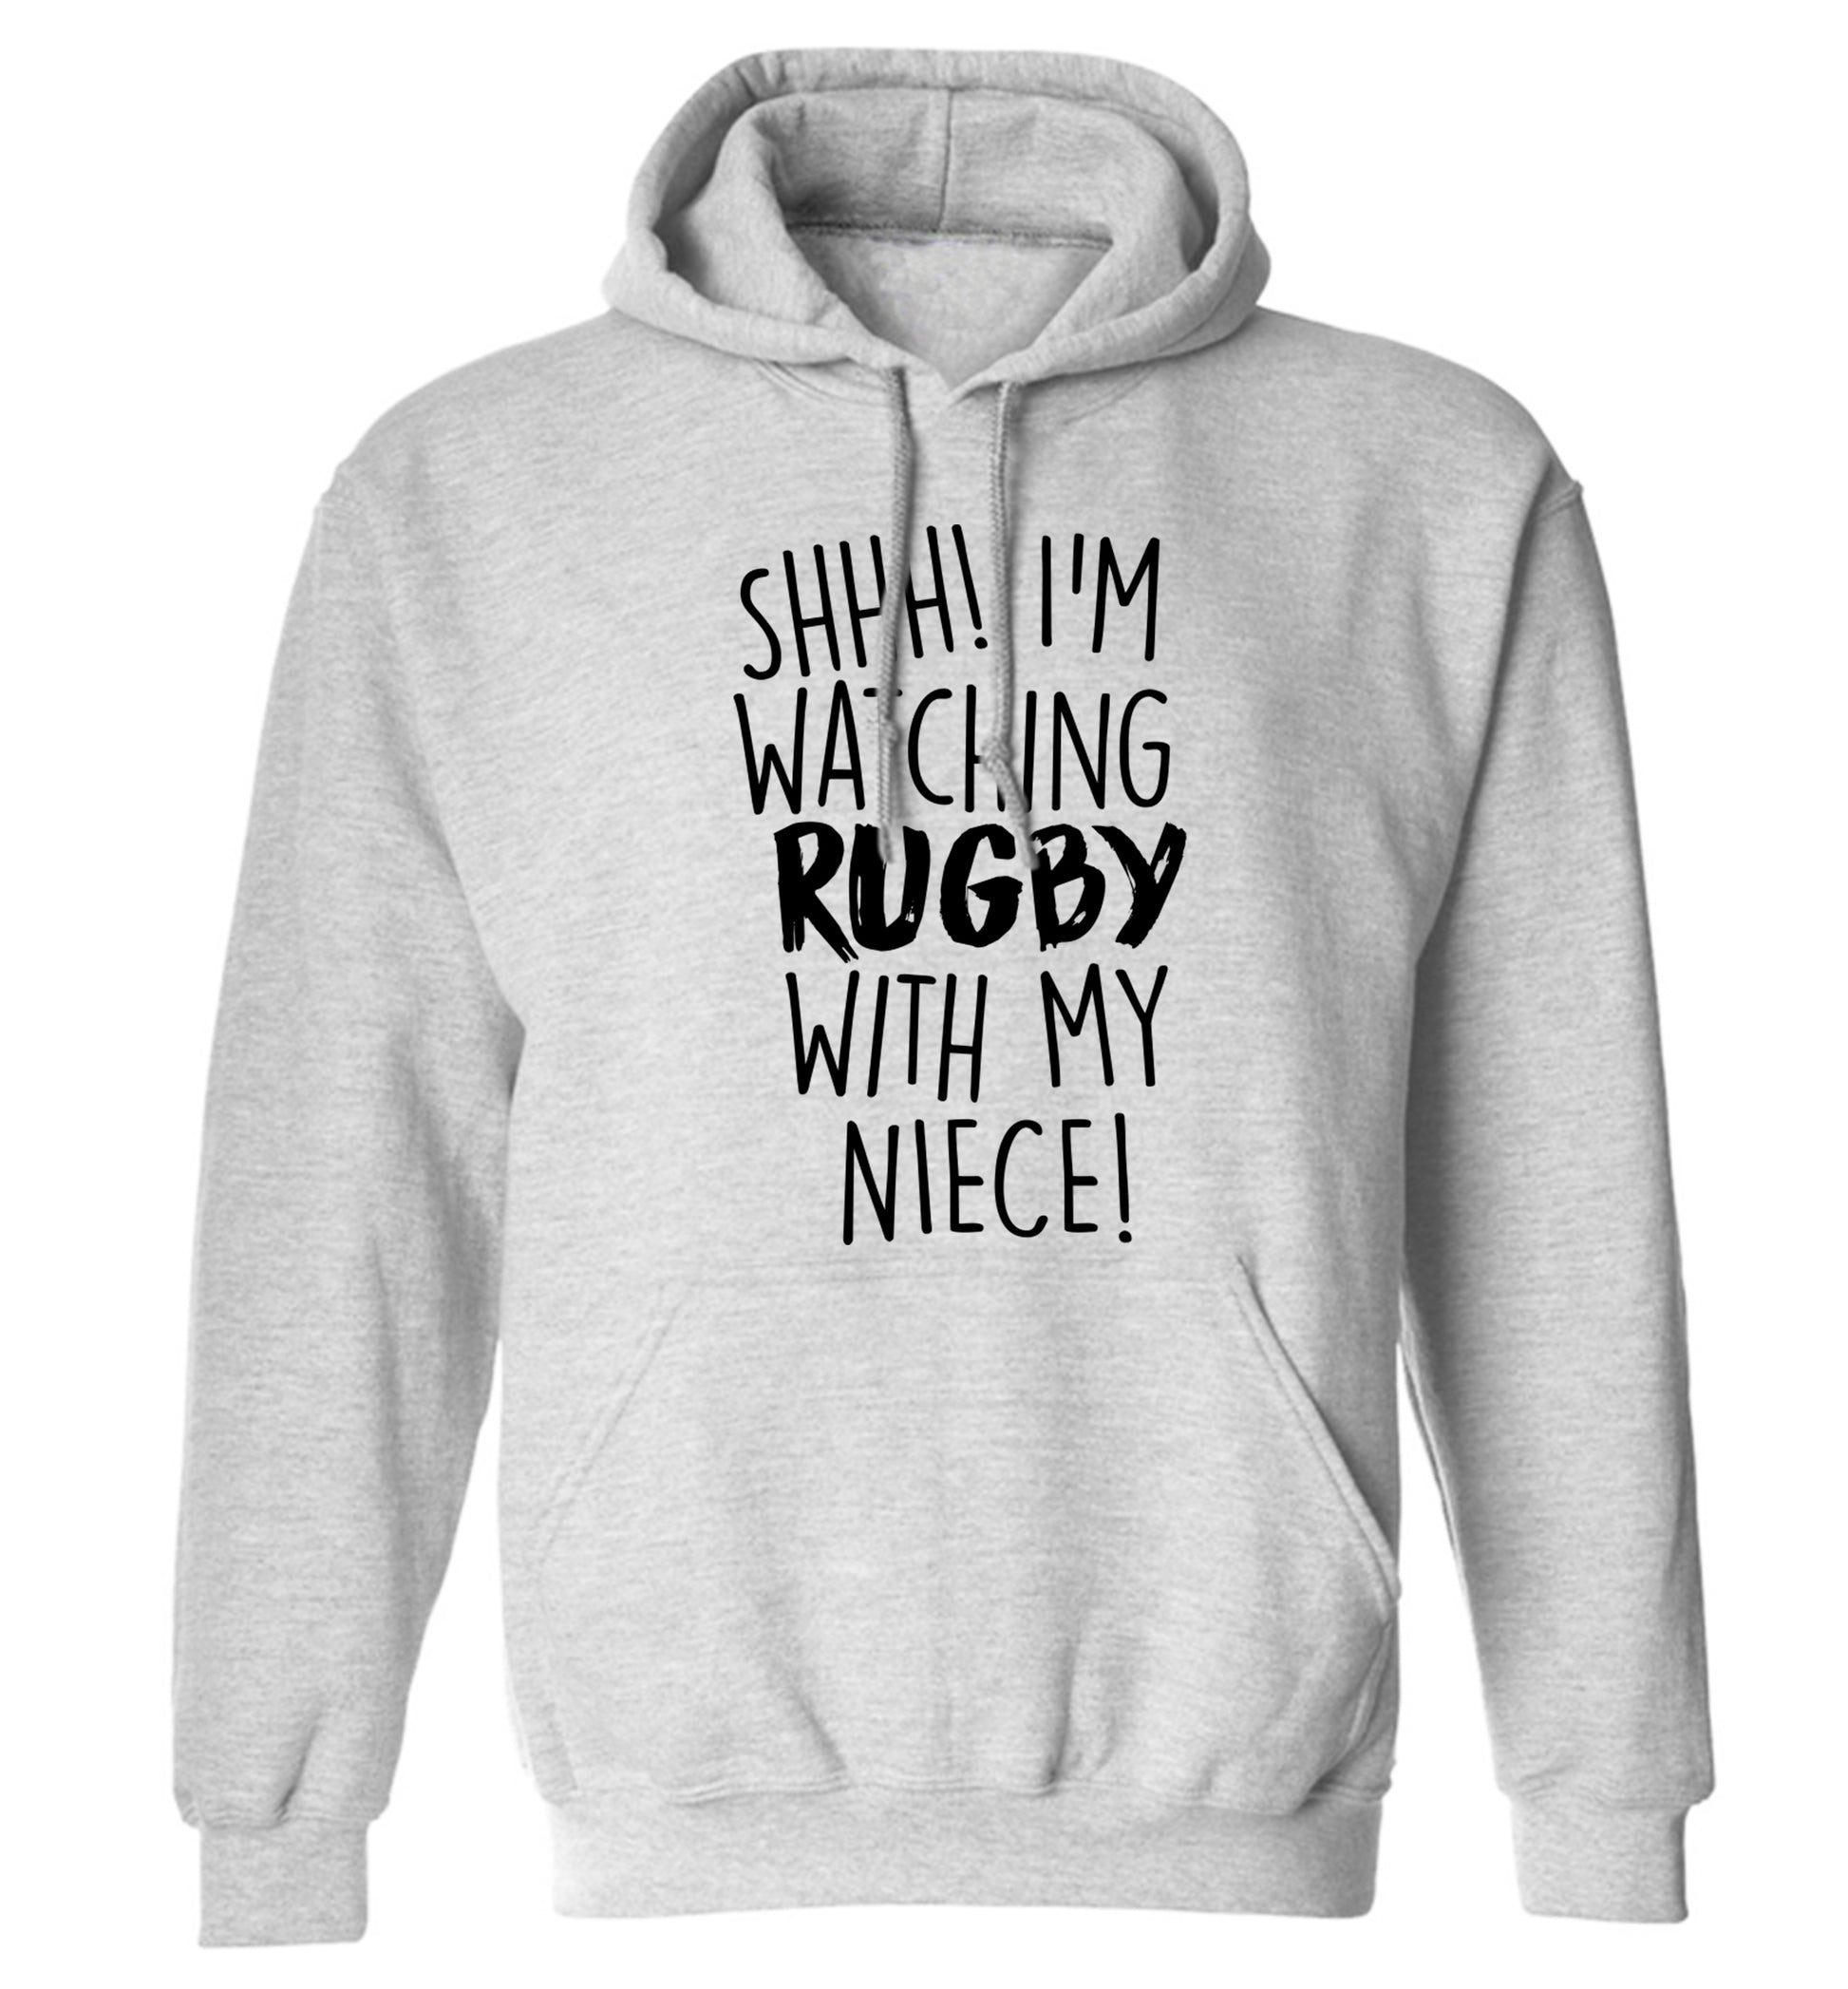 Shh.. I'm watching rugby with my niece adults unisex grey hoodie 2XL